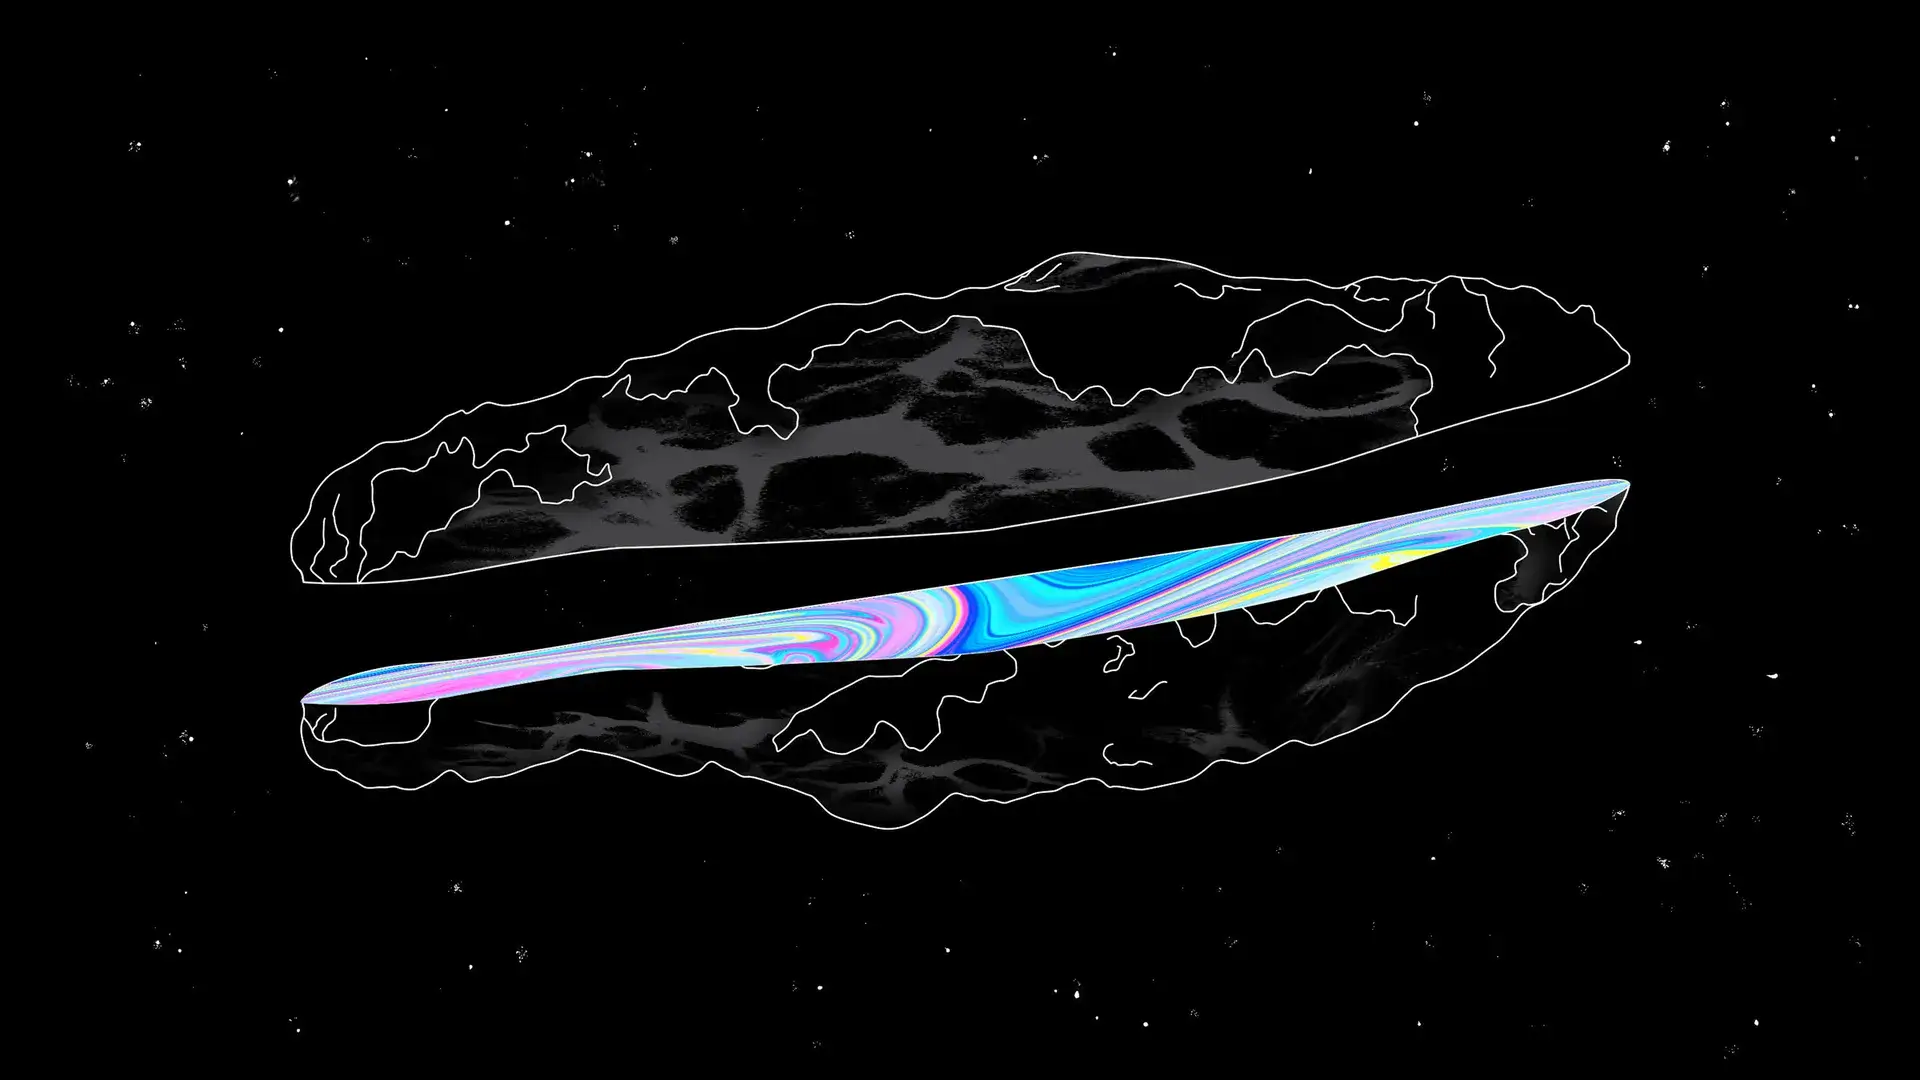 Elon Musk Warns: "Oumuamua Is NOT What You Think!"